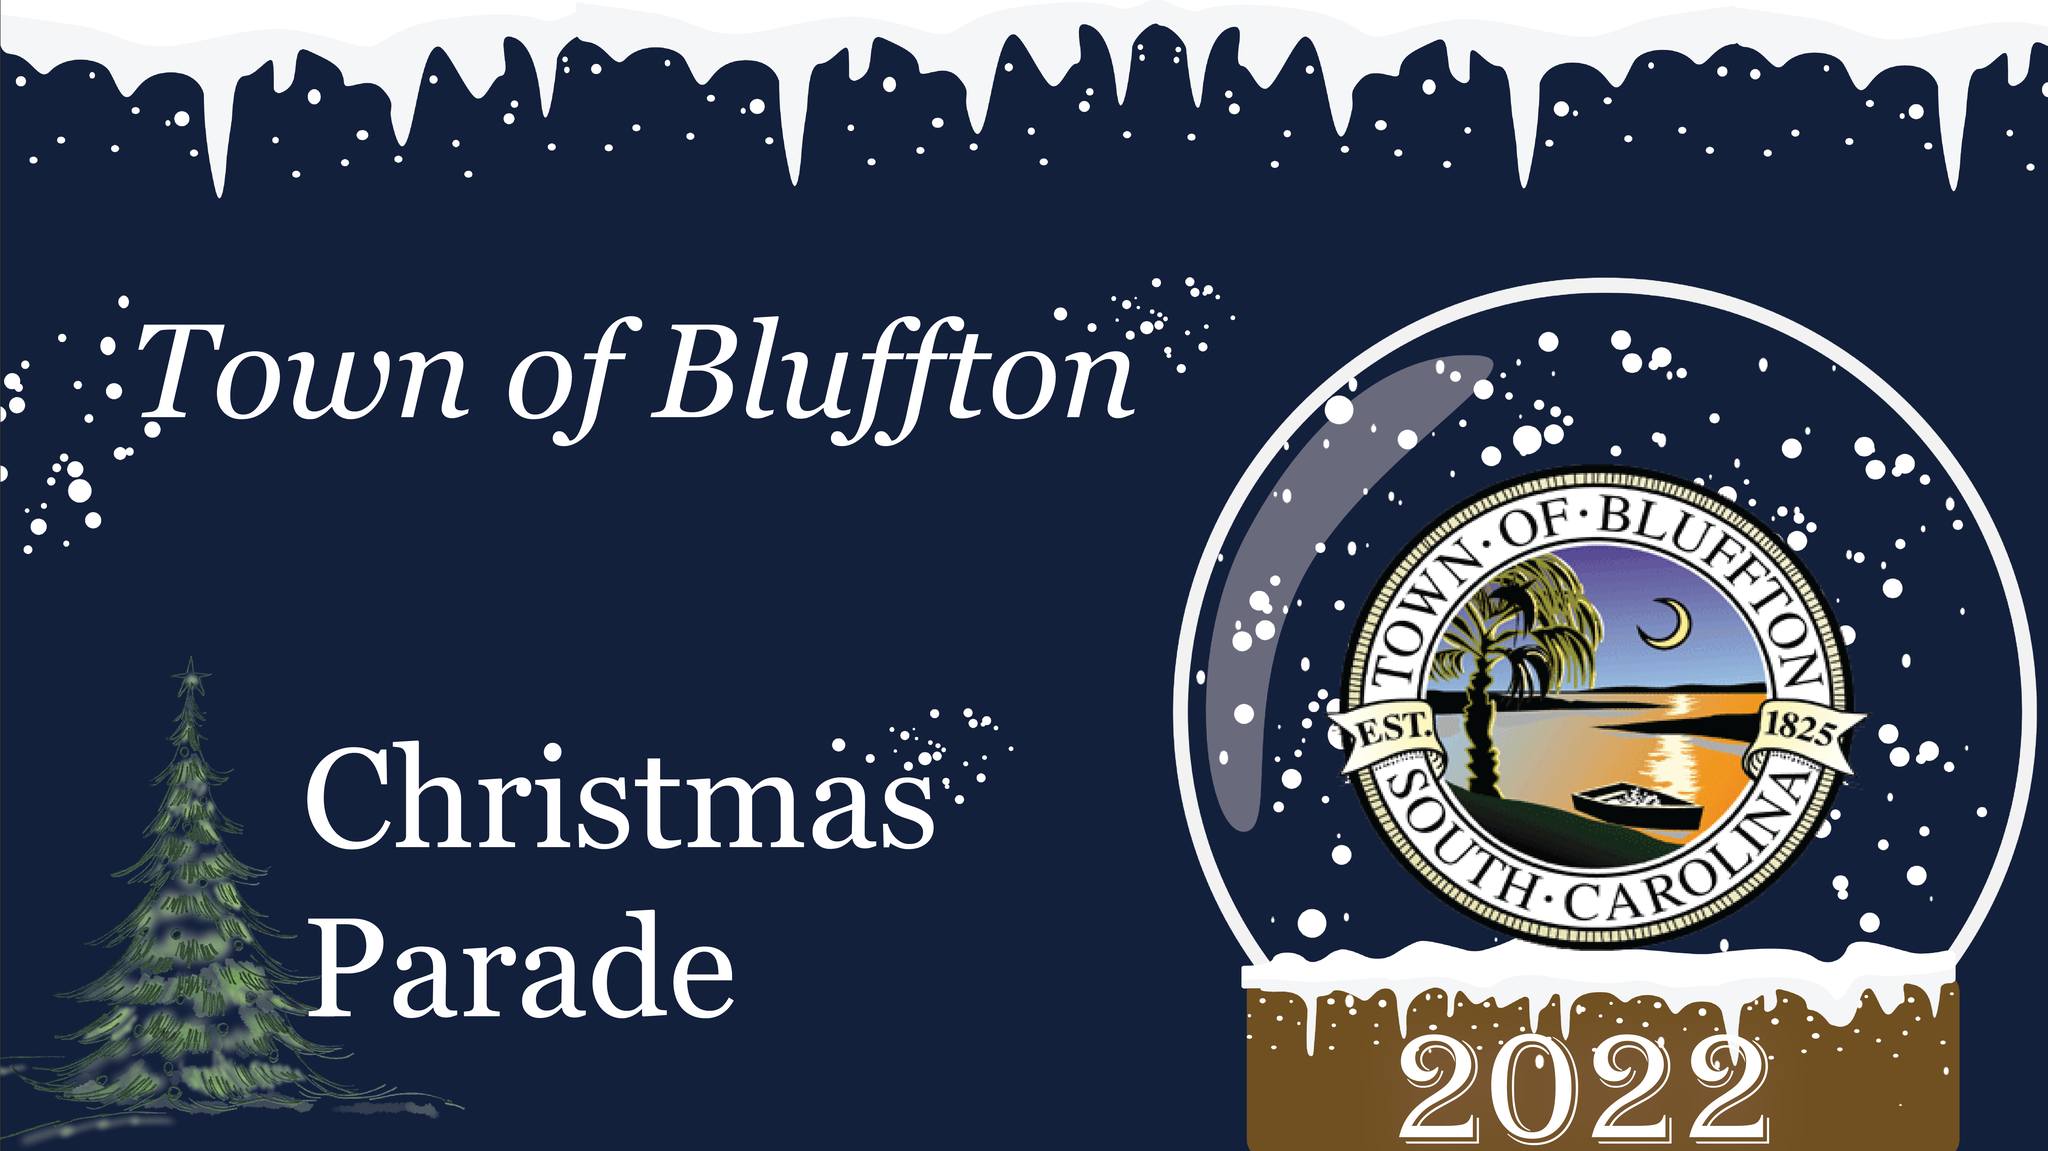 Town of Bluffton's 51st Annual Christmas Parade Explore Beaufort SC